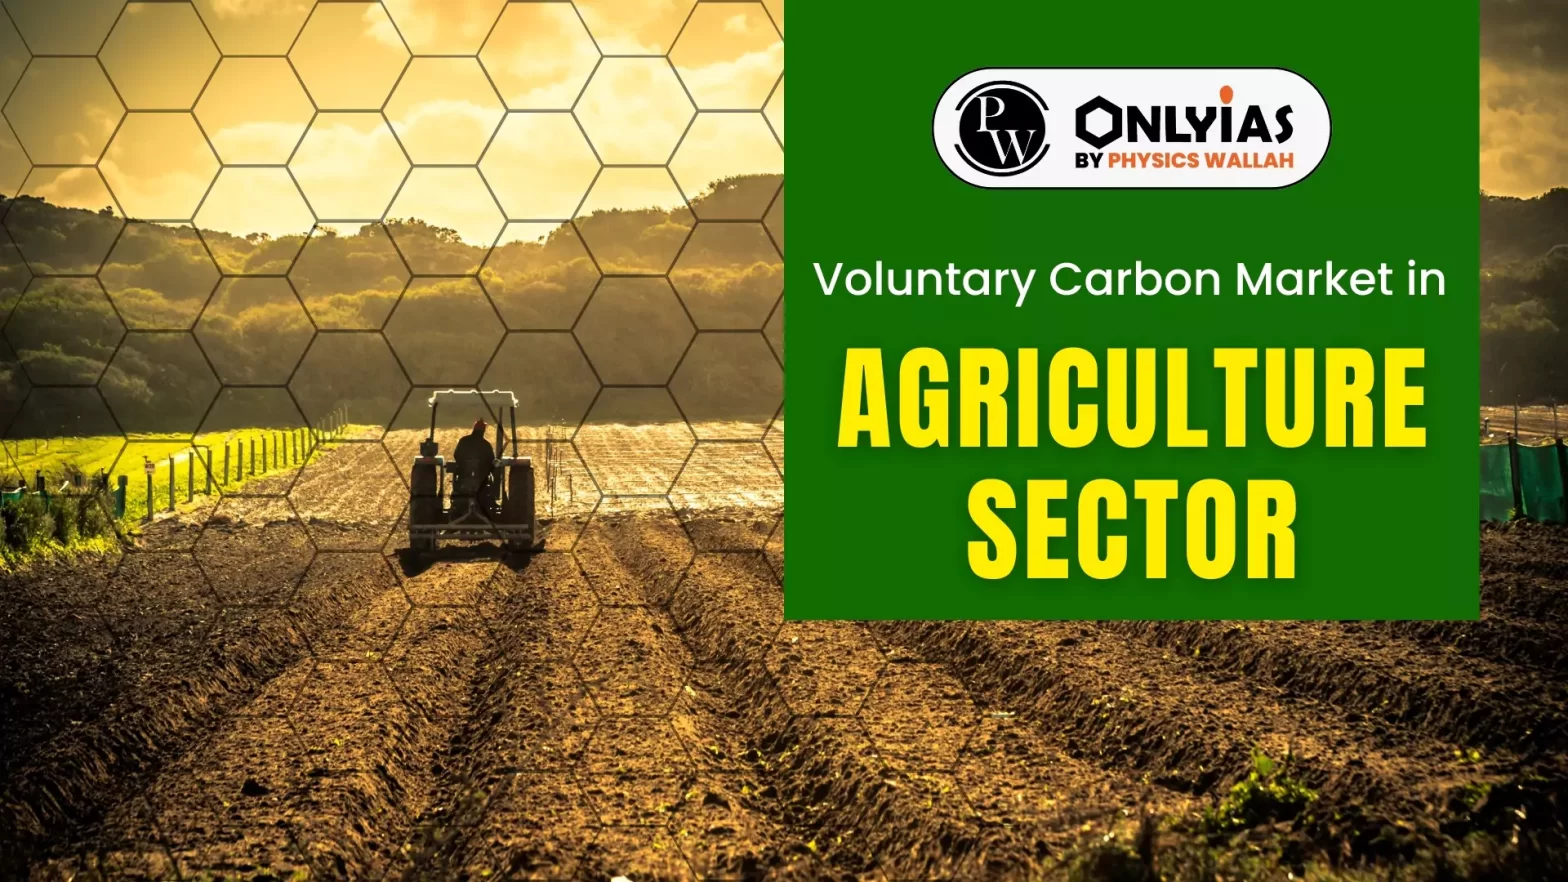 Voluntary Carbon Market in Agriculture Sector